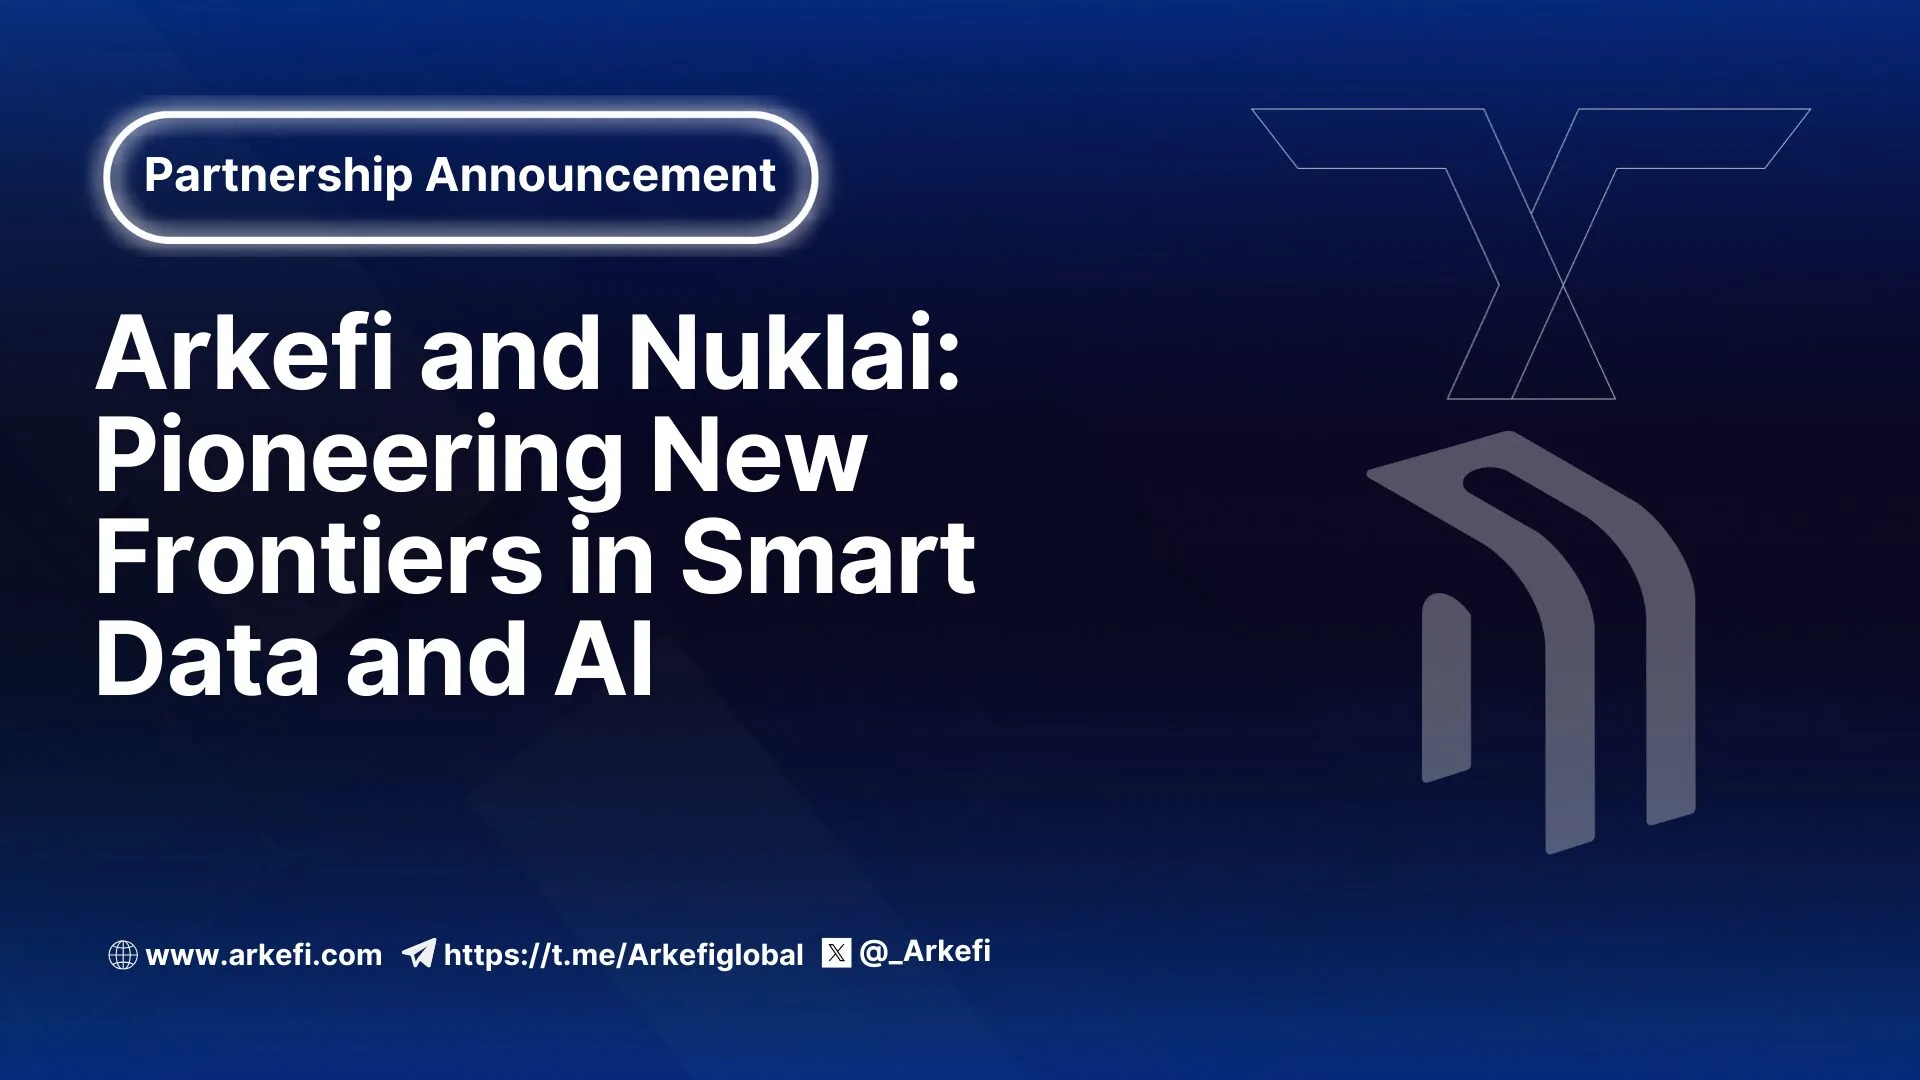 Announcing the Strategic Partnership Between Arkefi and Nuklai: Pioneering New Frontiers in Smart Data and AI